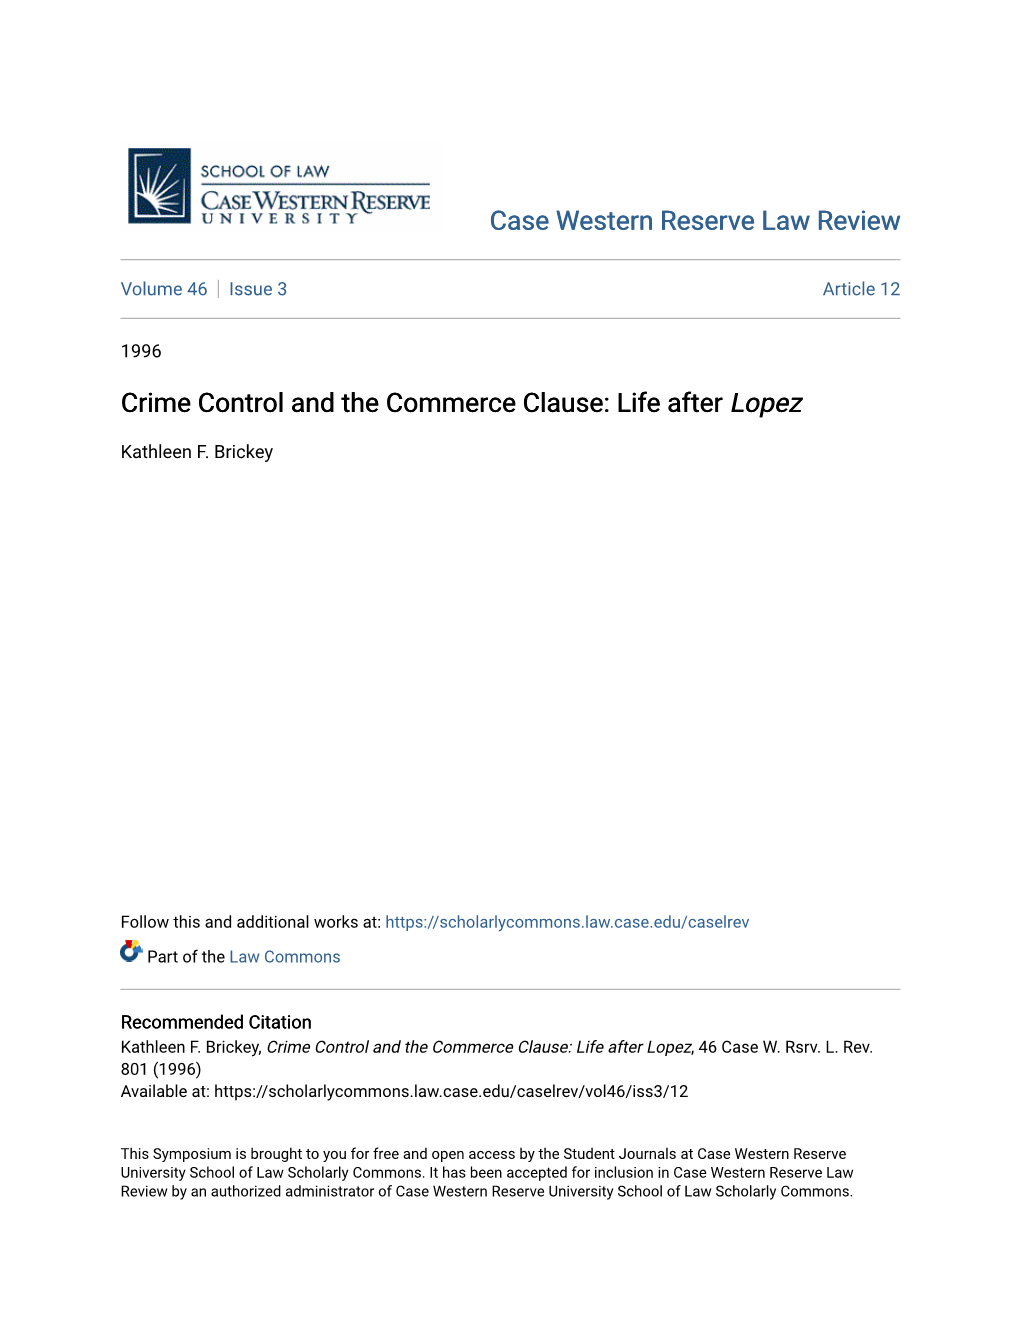 Crime Control and the Commerce Clause: Life After Lopez